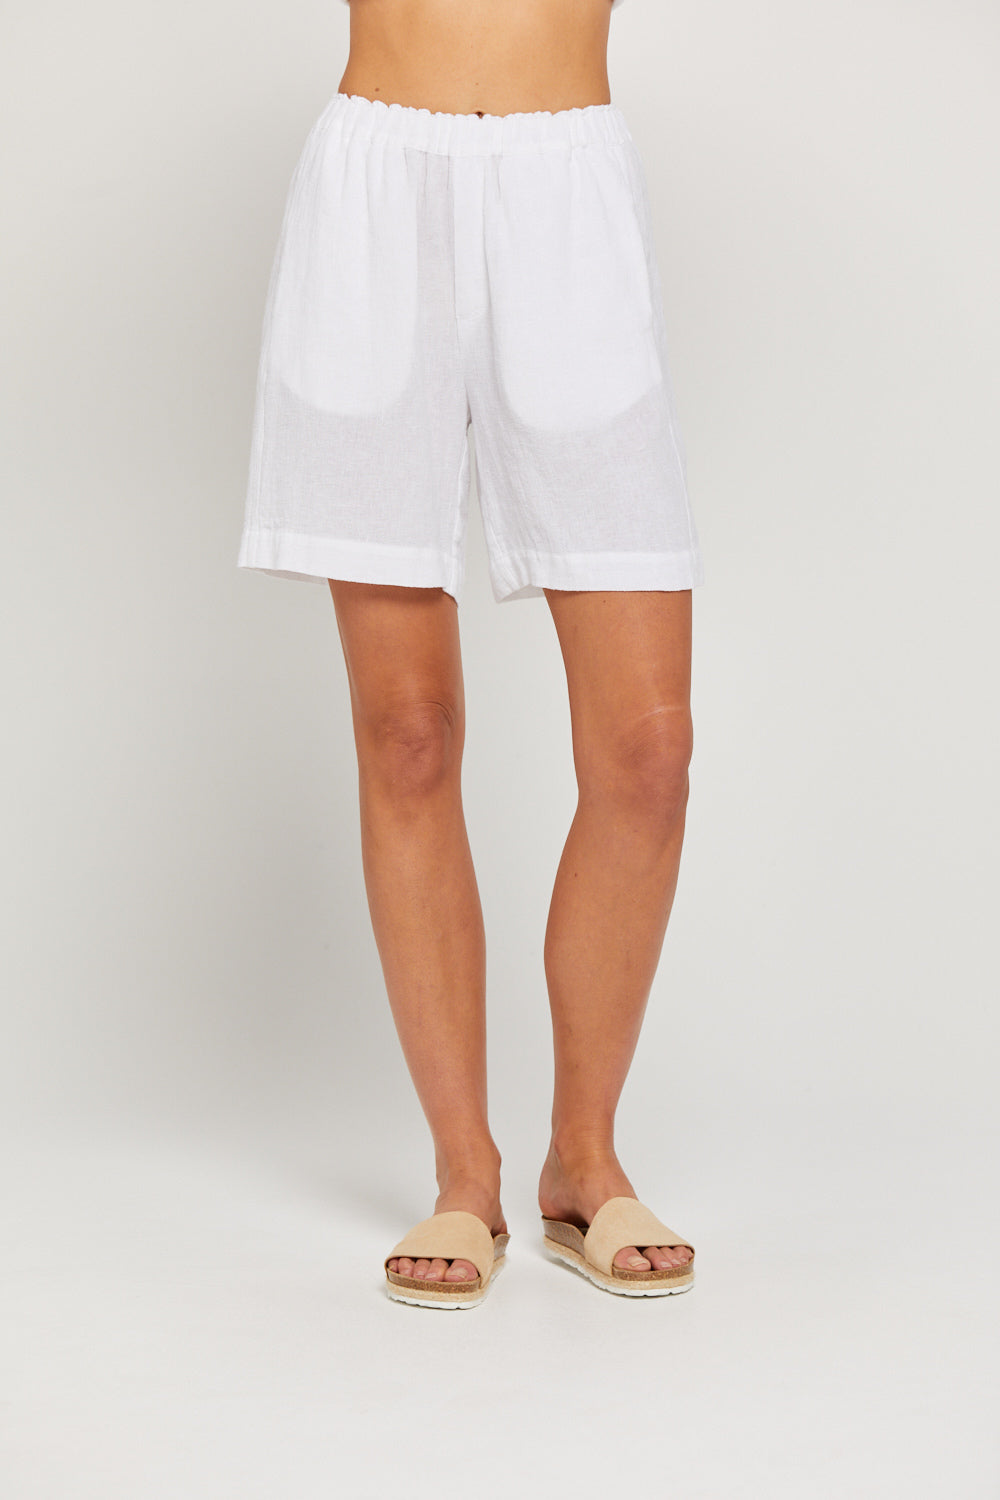 Parallel Culture Shoes and Fashion Online SHORTS BY RIDLEY GRETA SHORT WHITE